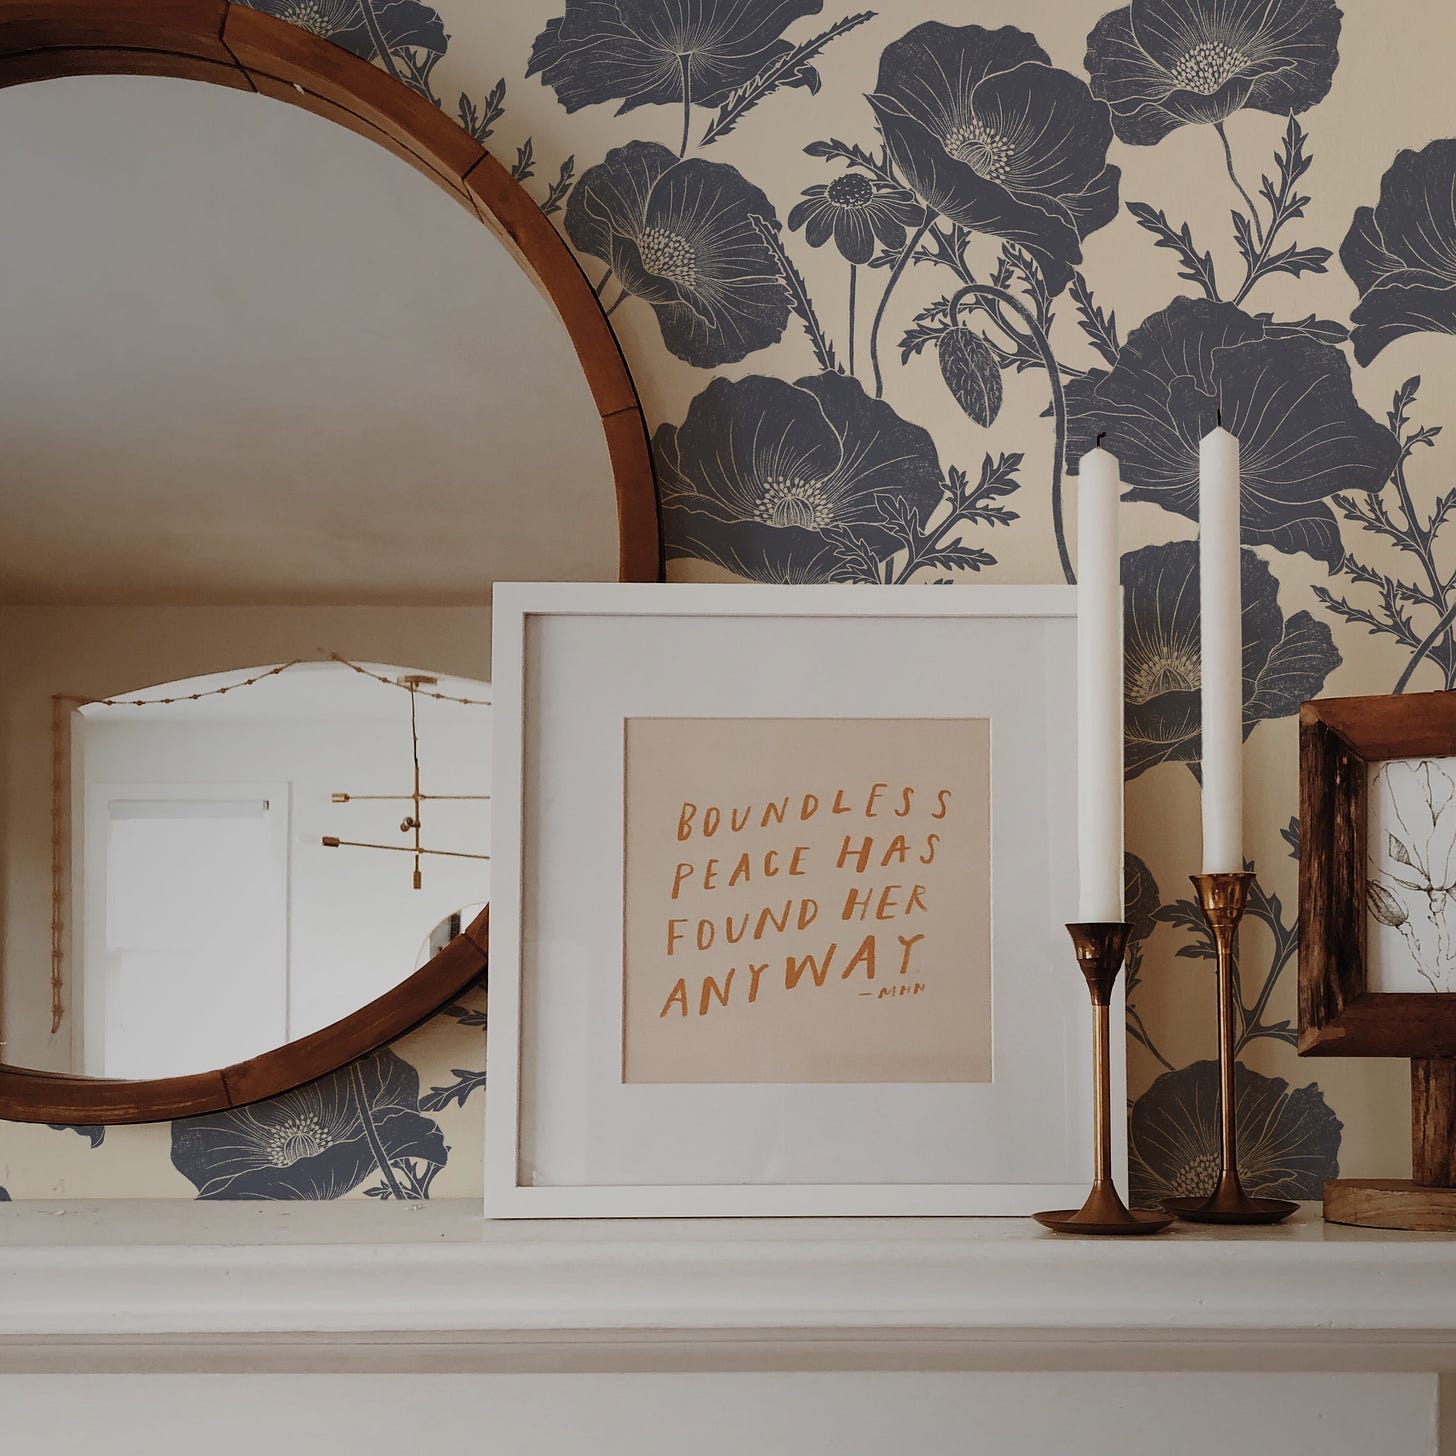 A mockup of the pattern on wallpaper. The image features a round wooden mirror above a mantel, upon which a framed art print and two candle sticks sit, in front of a wall featuring the new floral wallpaper pattern.